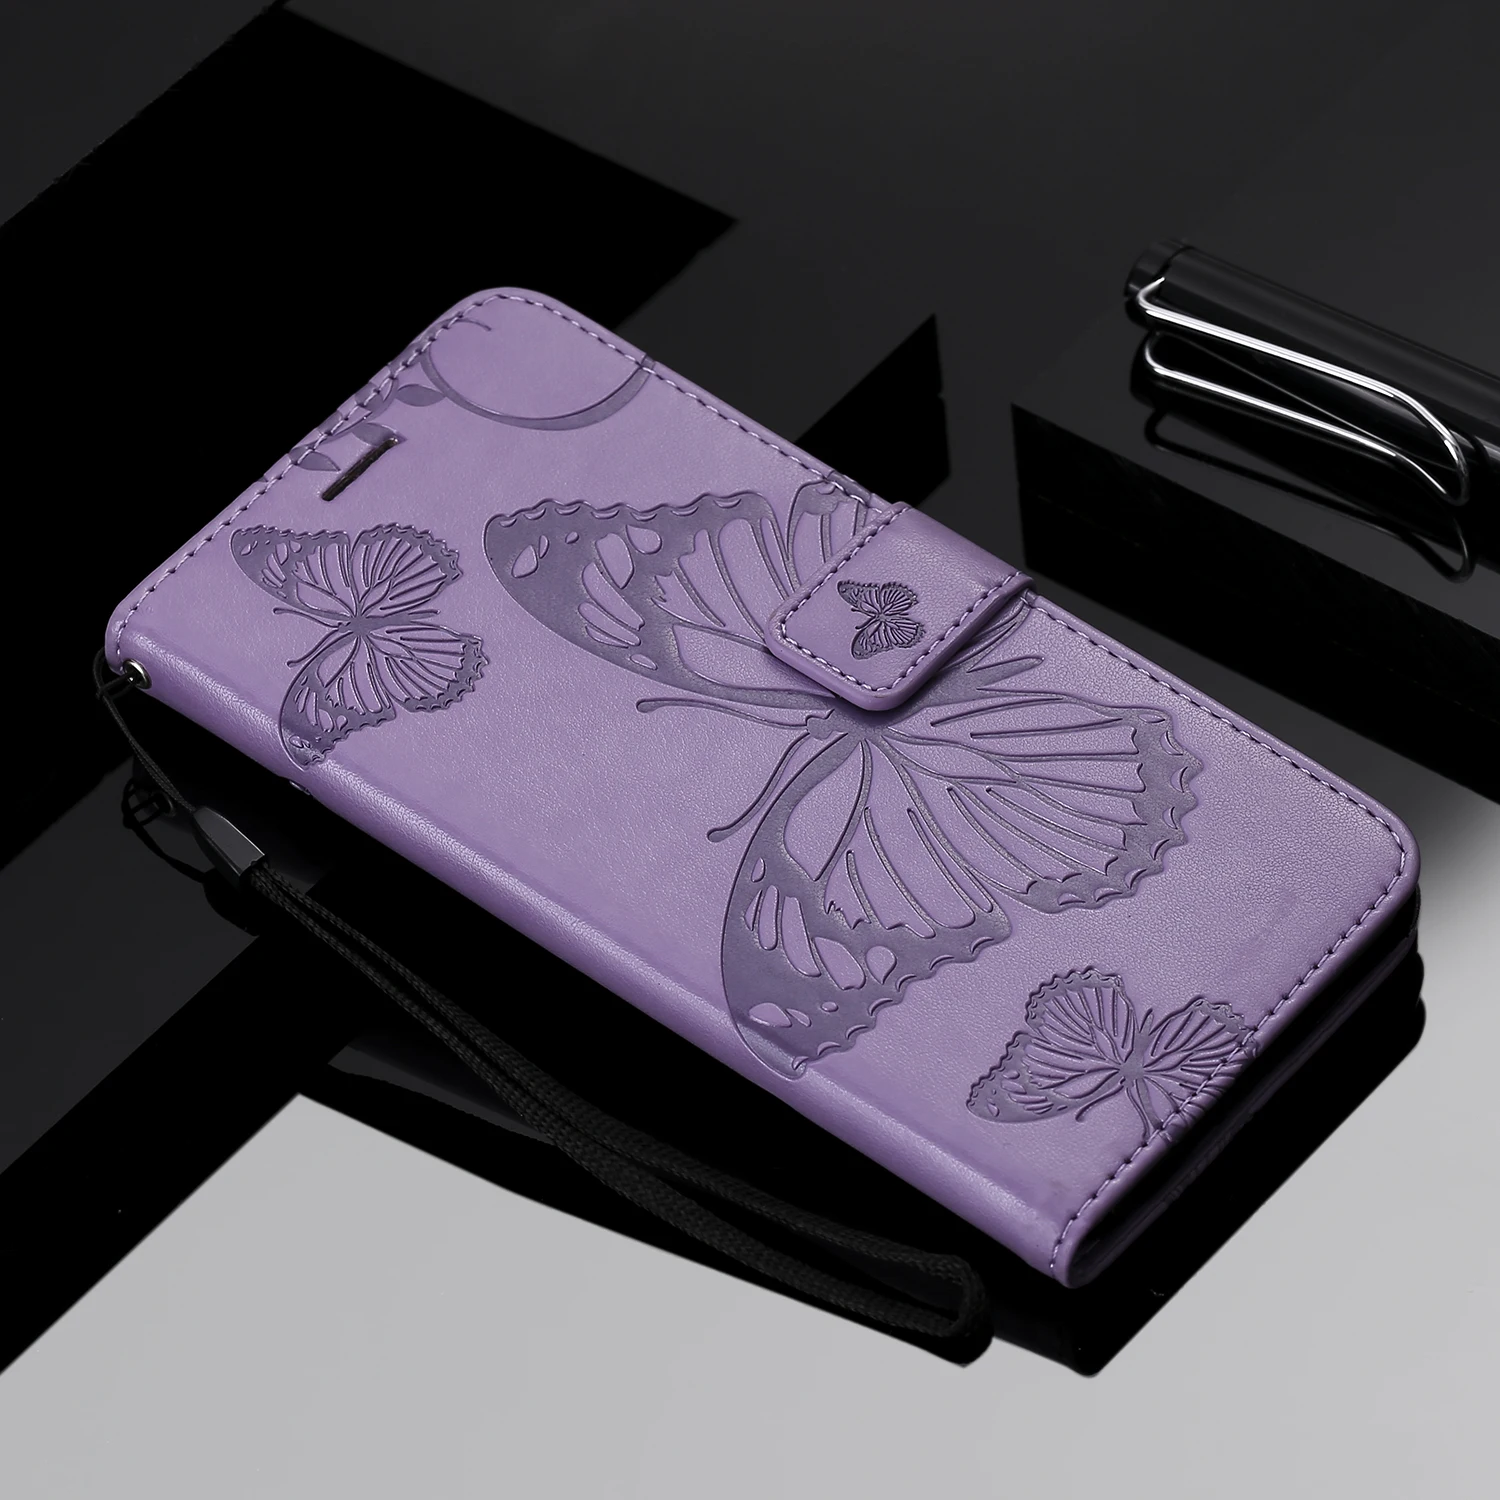 Butterfly Wallet Flip Case Etui For Google Pixel 2 4 5 3A XL 4A 4G 4A 5G Card Holder Leather Cover For iPhone 6 6S 7 8 SE 2020 images - 6